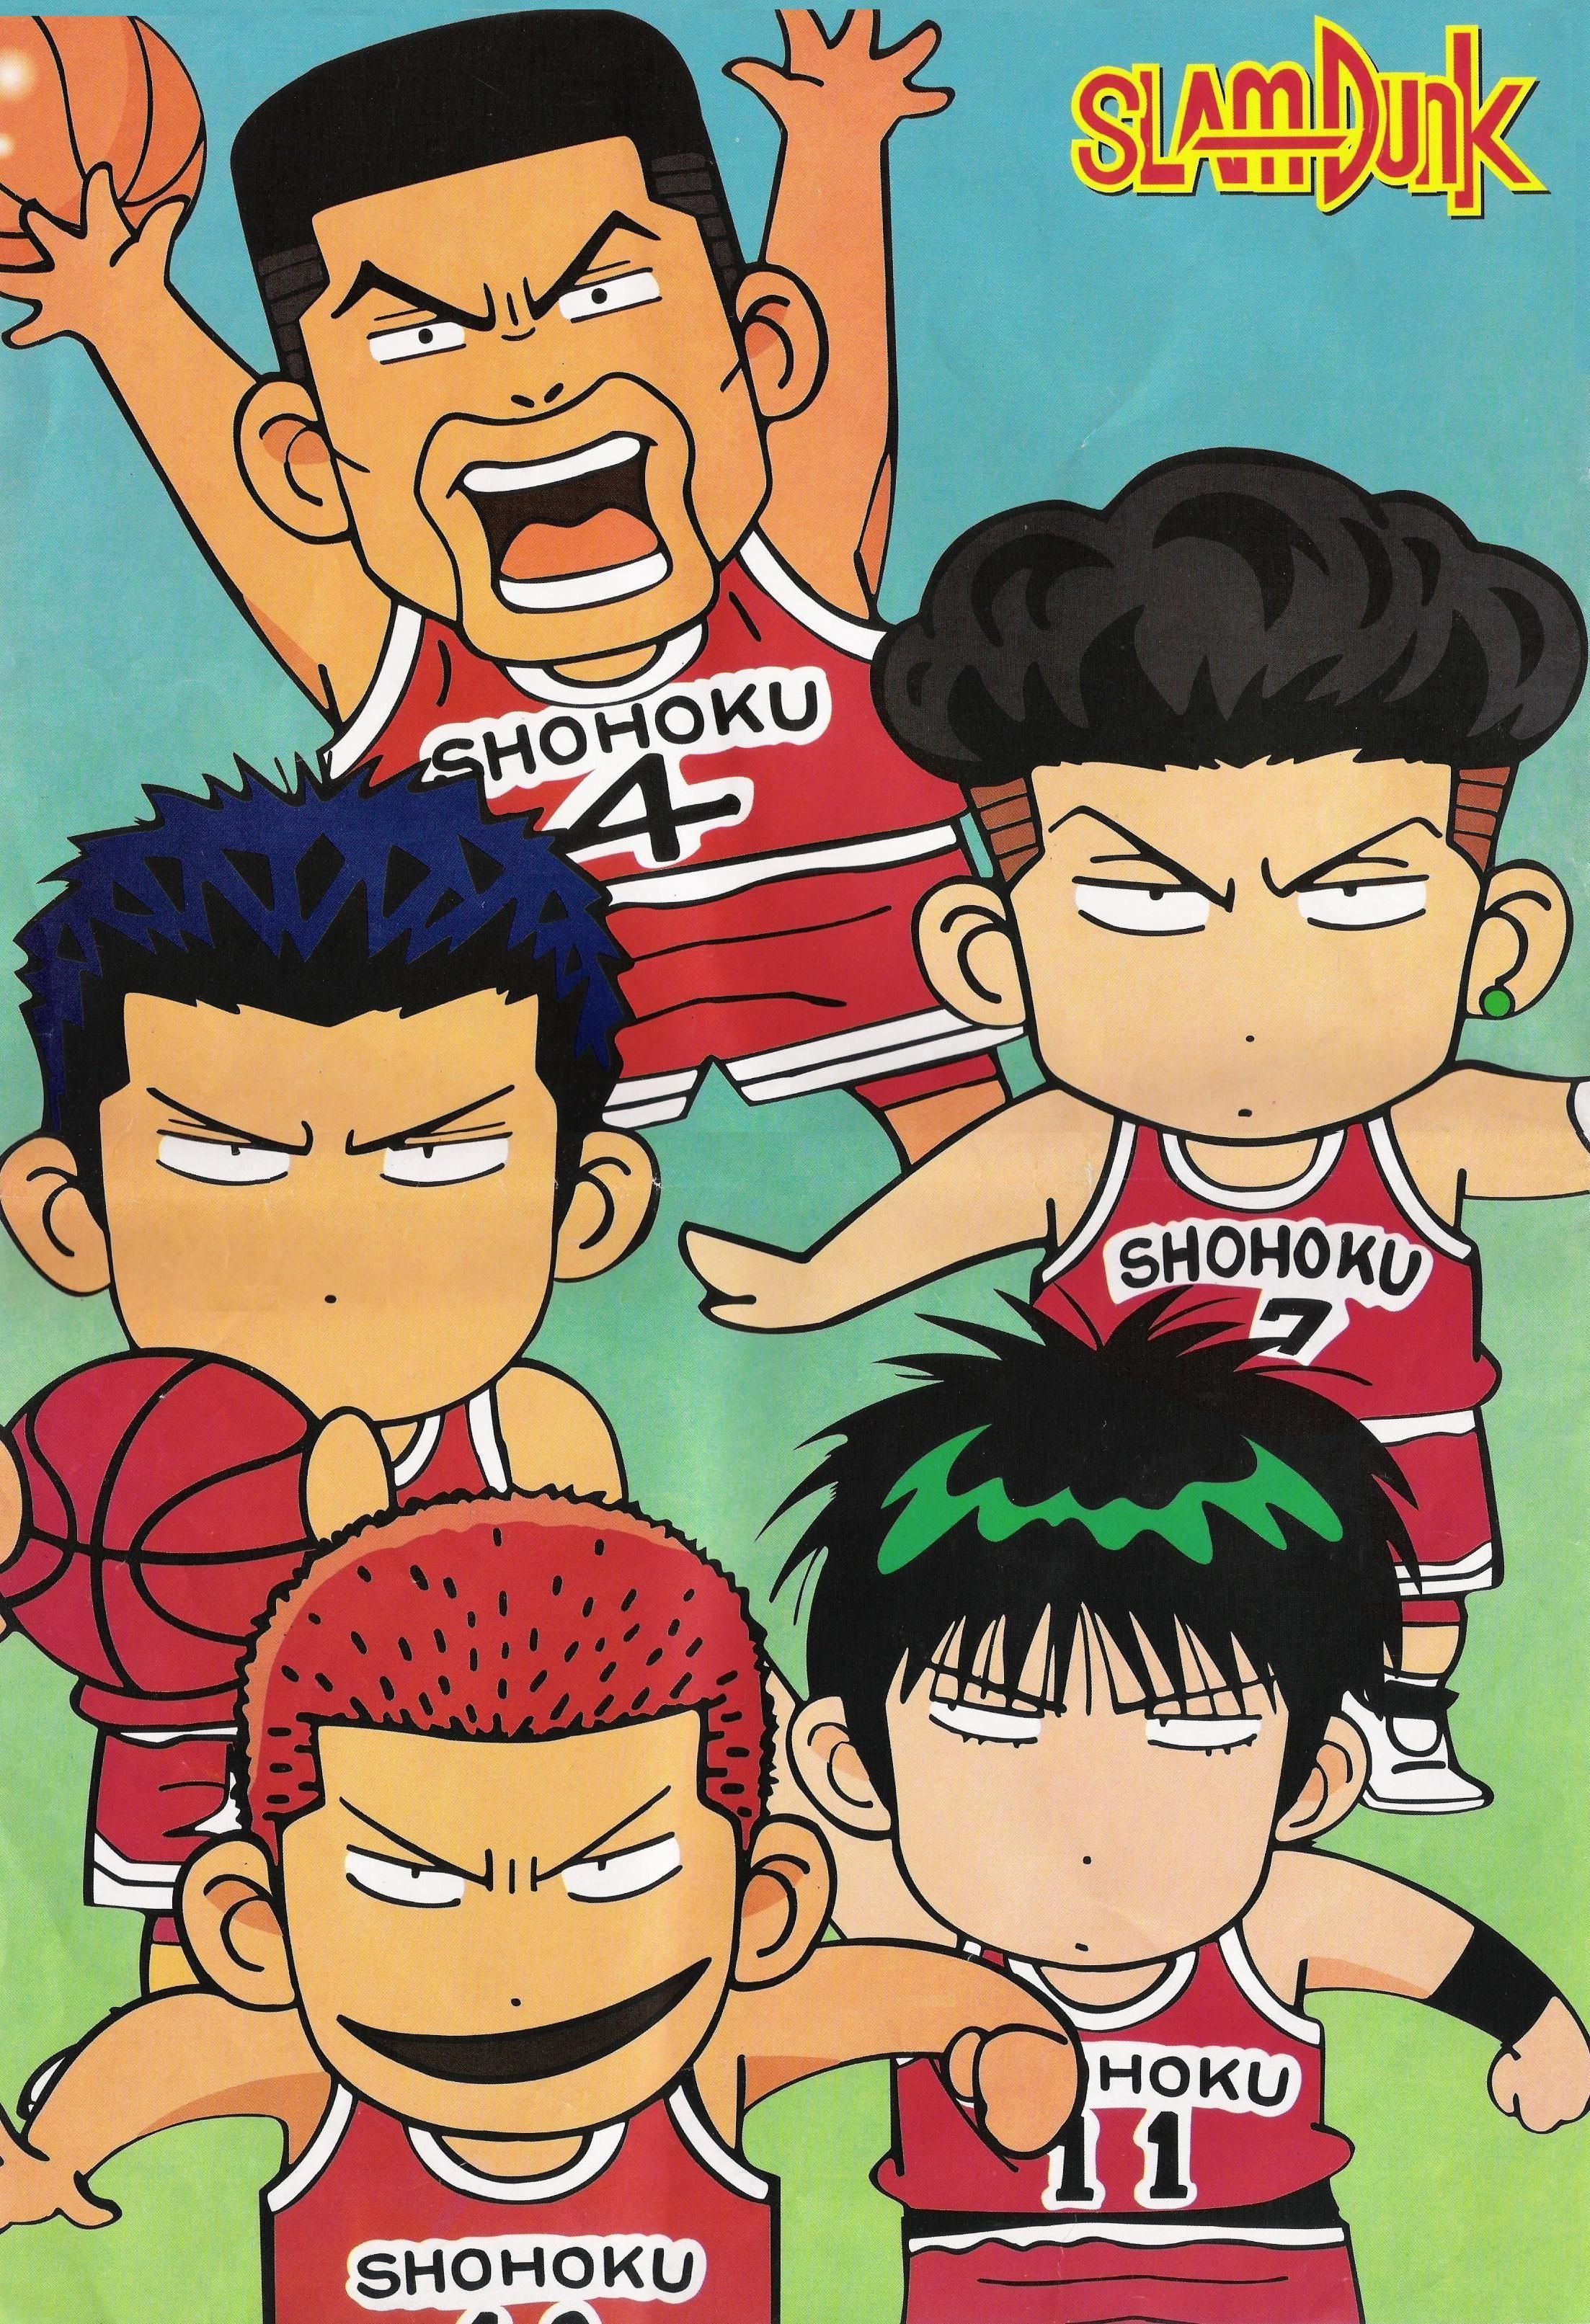 Download Slam Dunk: 5 chibies (2206x3225)